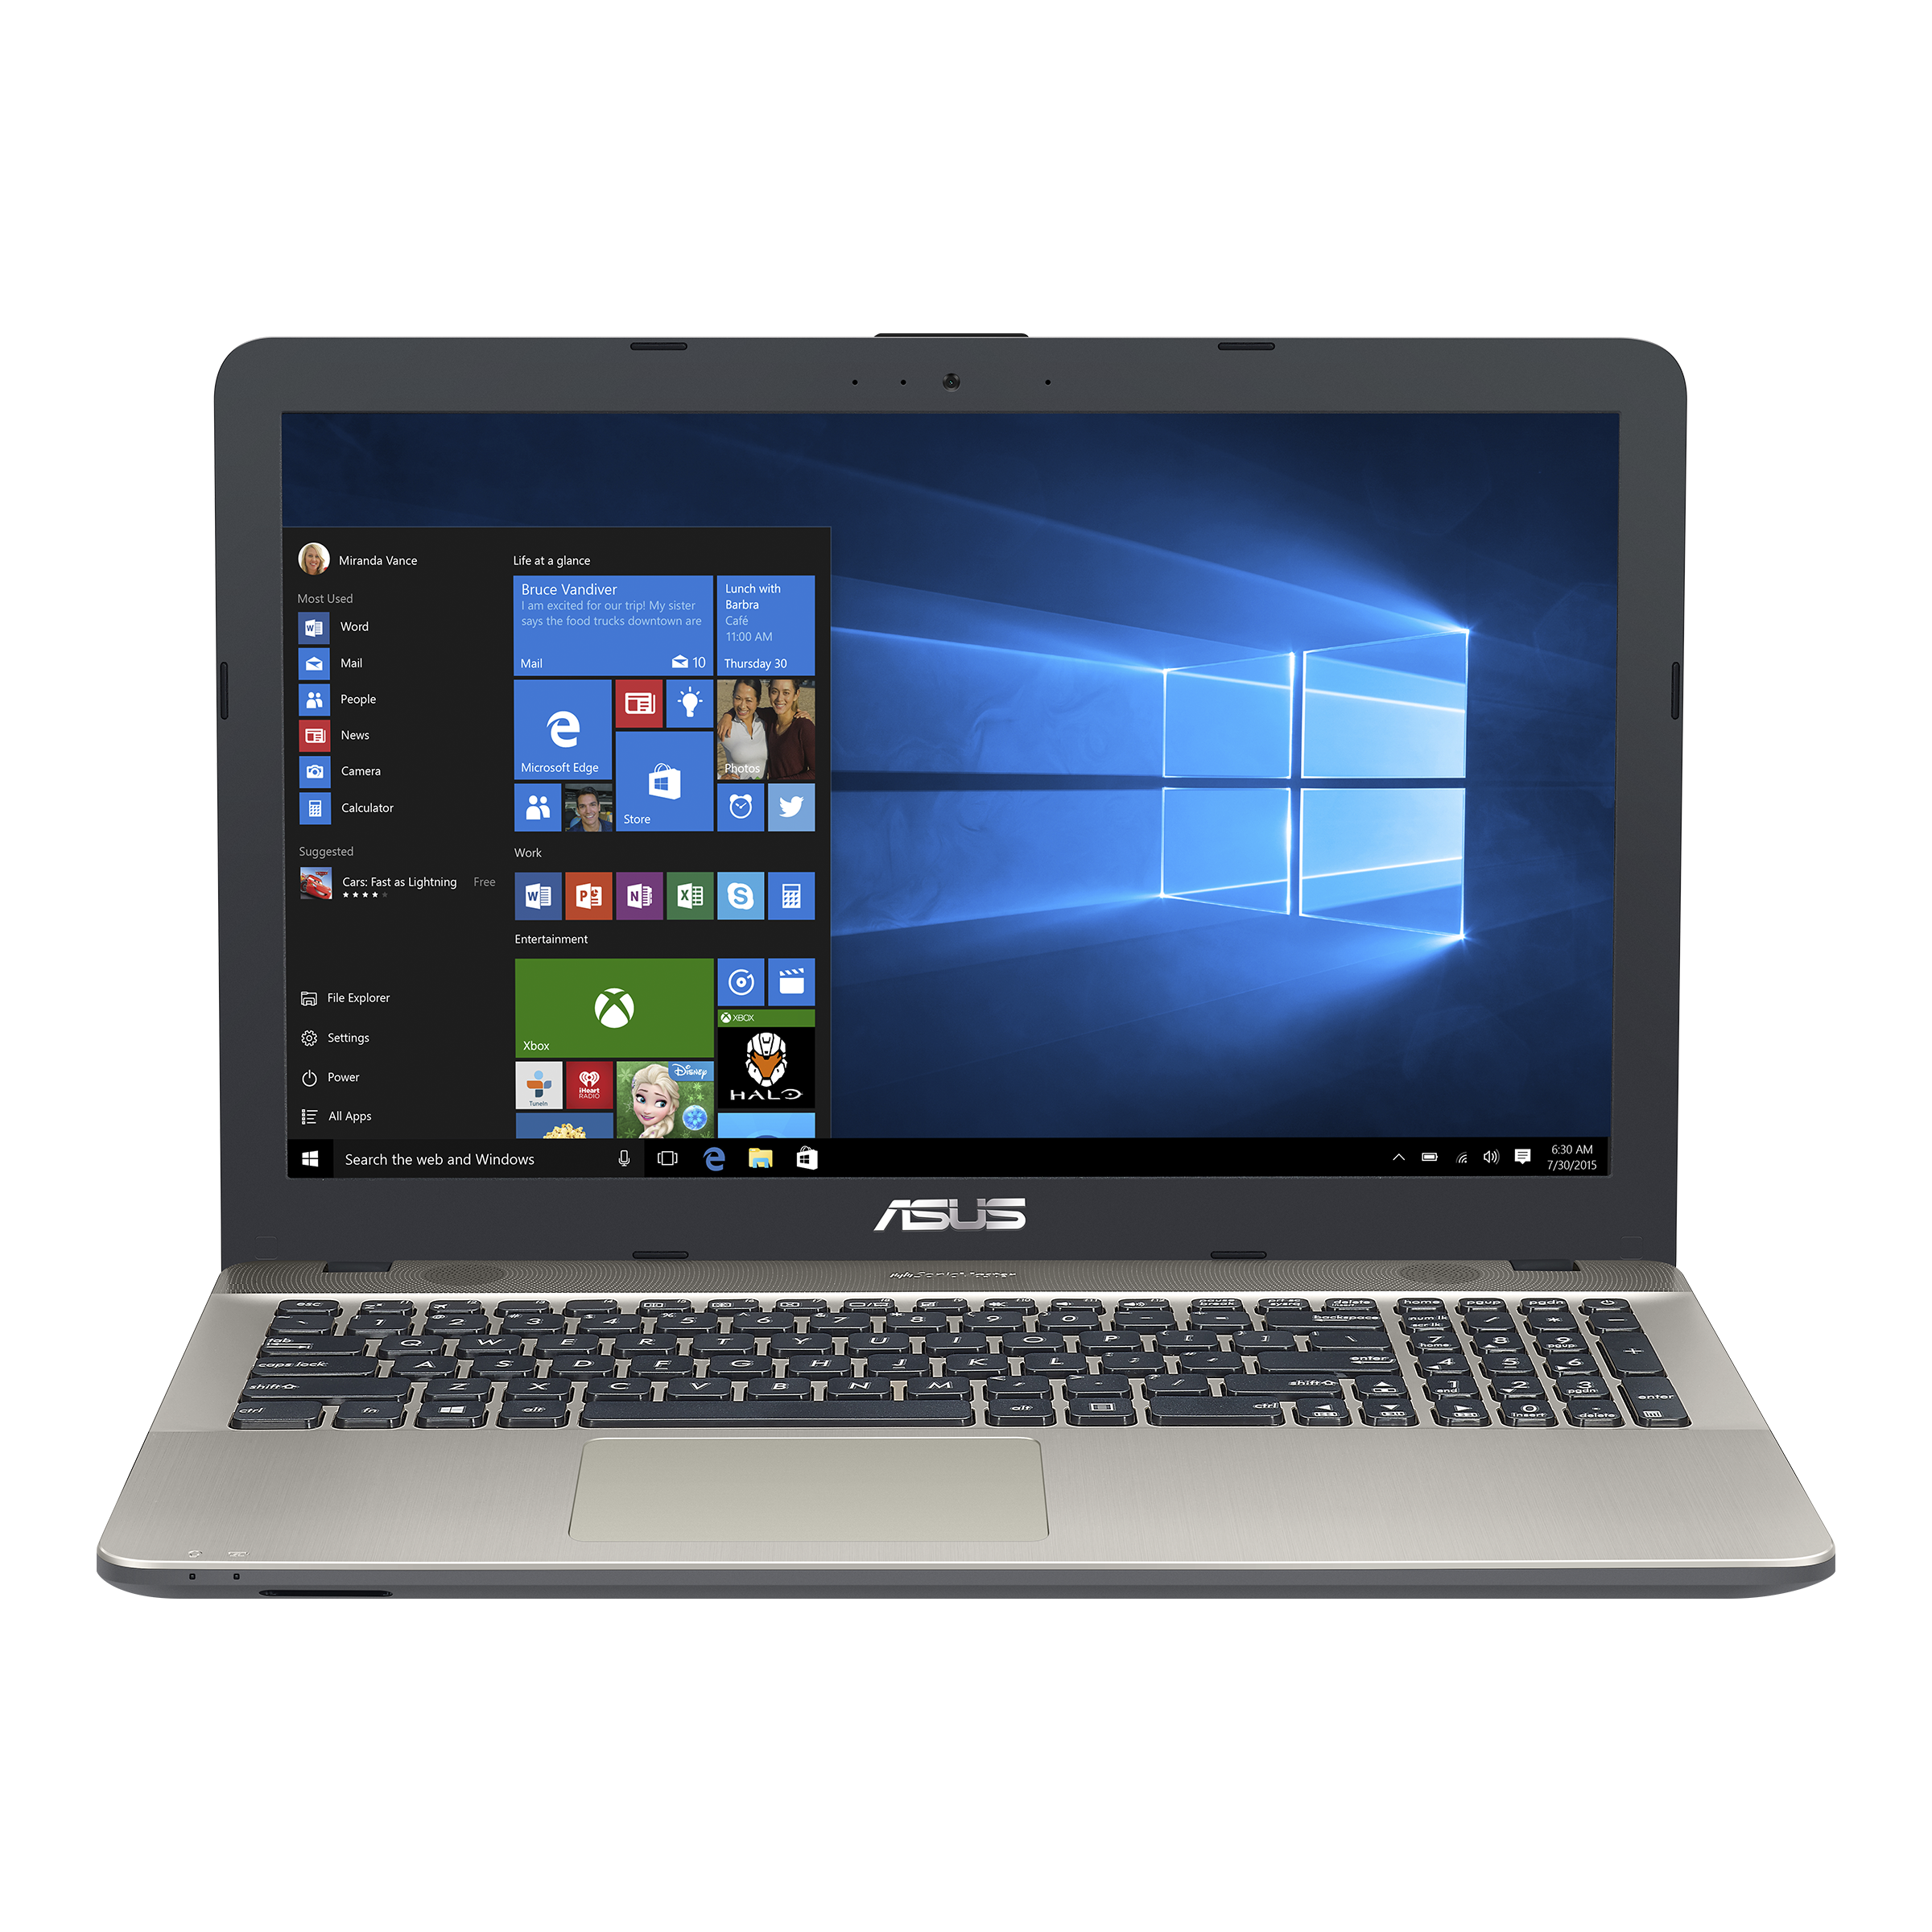 ASUS X541 - Tech Specs｜Laptops For Home｜ASUS Global